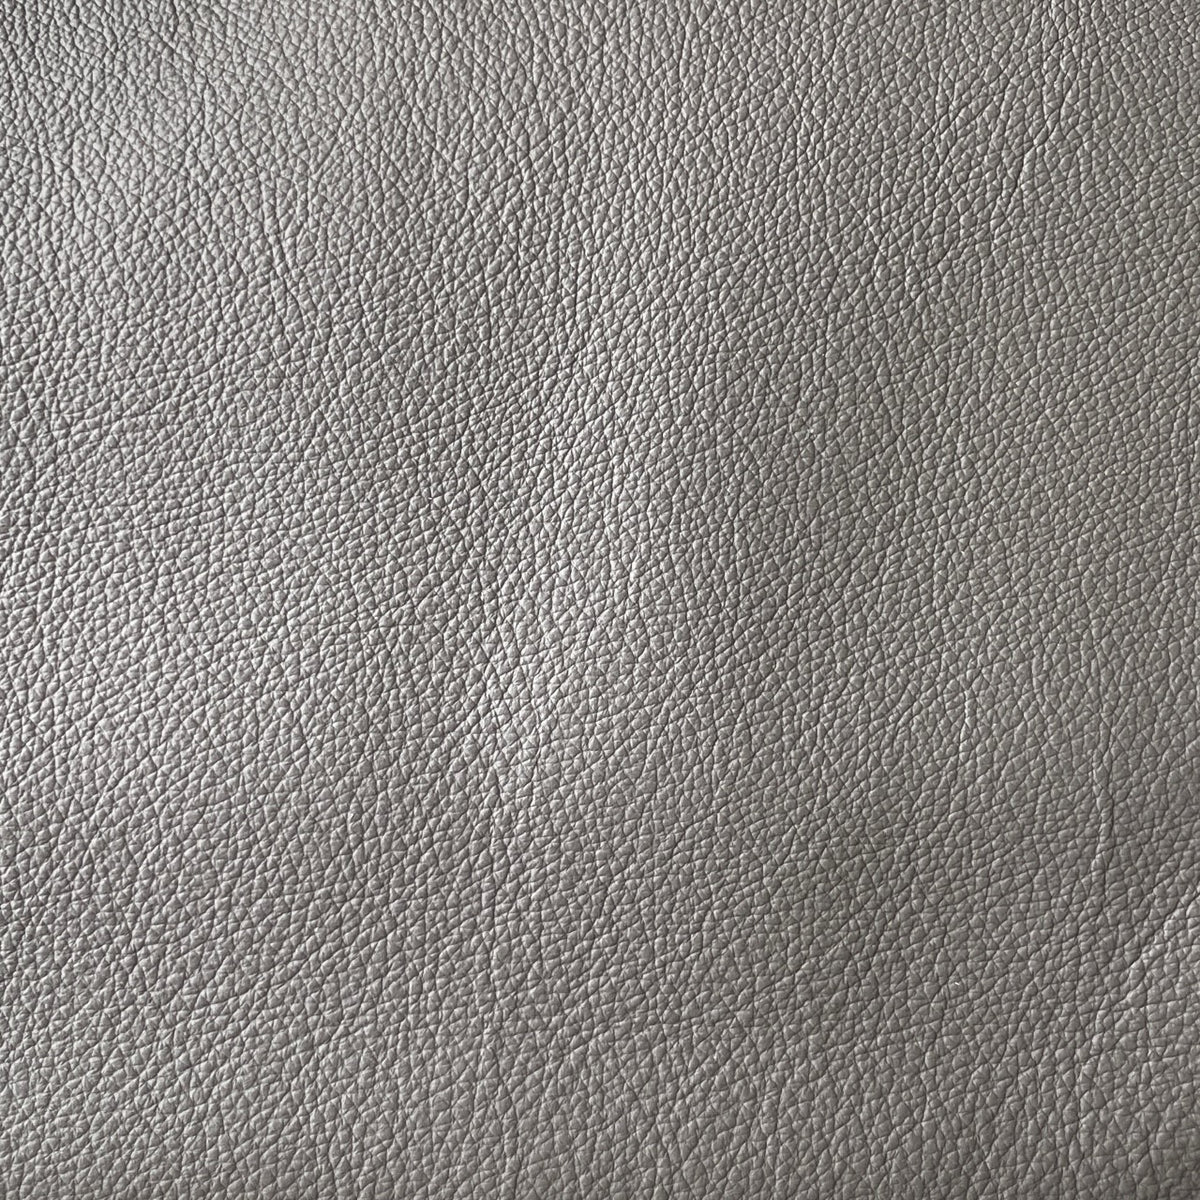 Upholstery Cow Hide #05 | Grey | 1.0/1.2mm | 63 sq.ft | $435 ea.